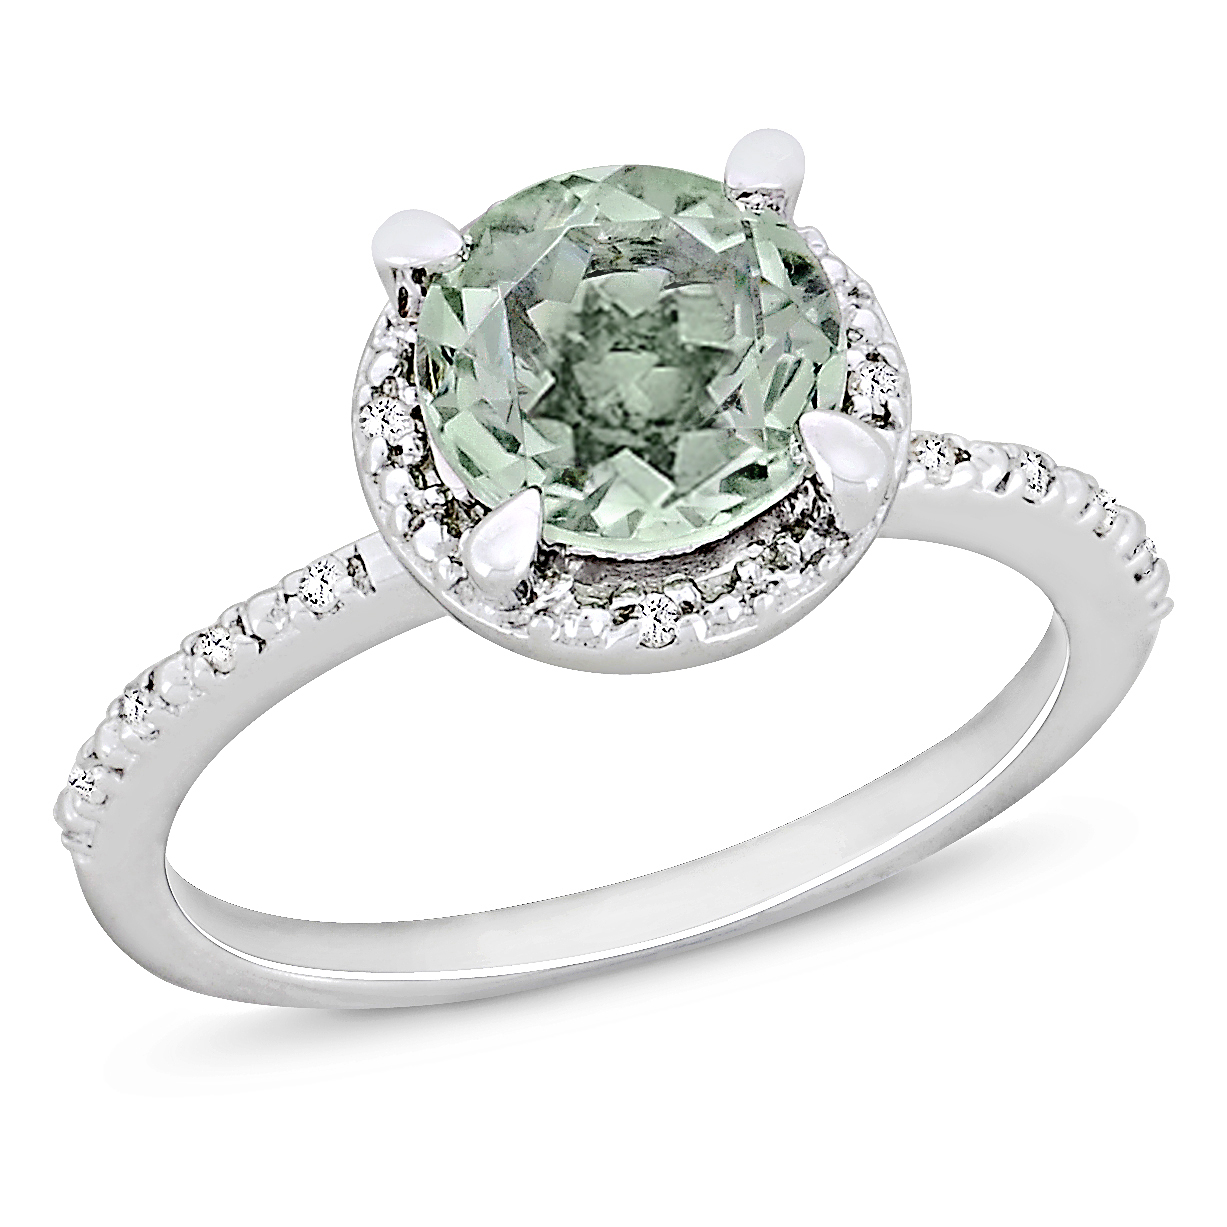 Amour 0.05 Carat T.W. Diamond and 1 1/6 Carat T.G.W. Green Amethyst Fashion Ring in Sterling Silver GH I3